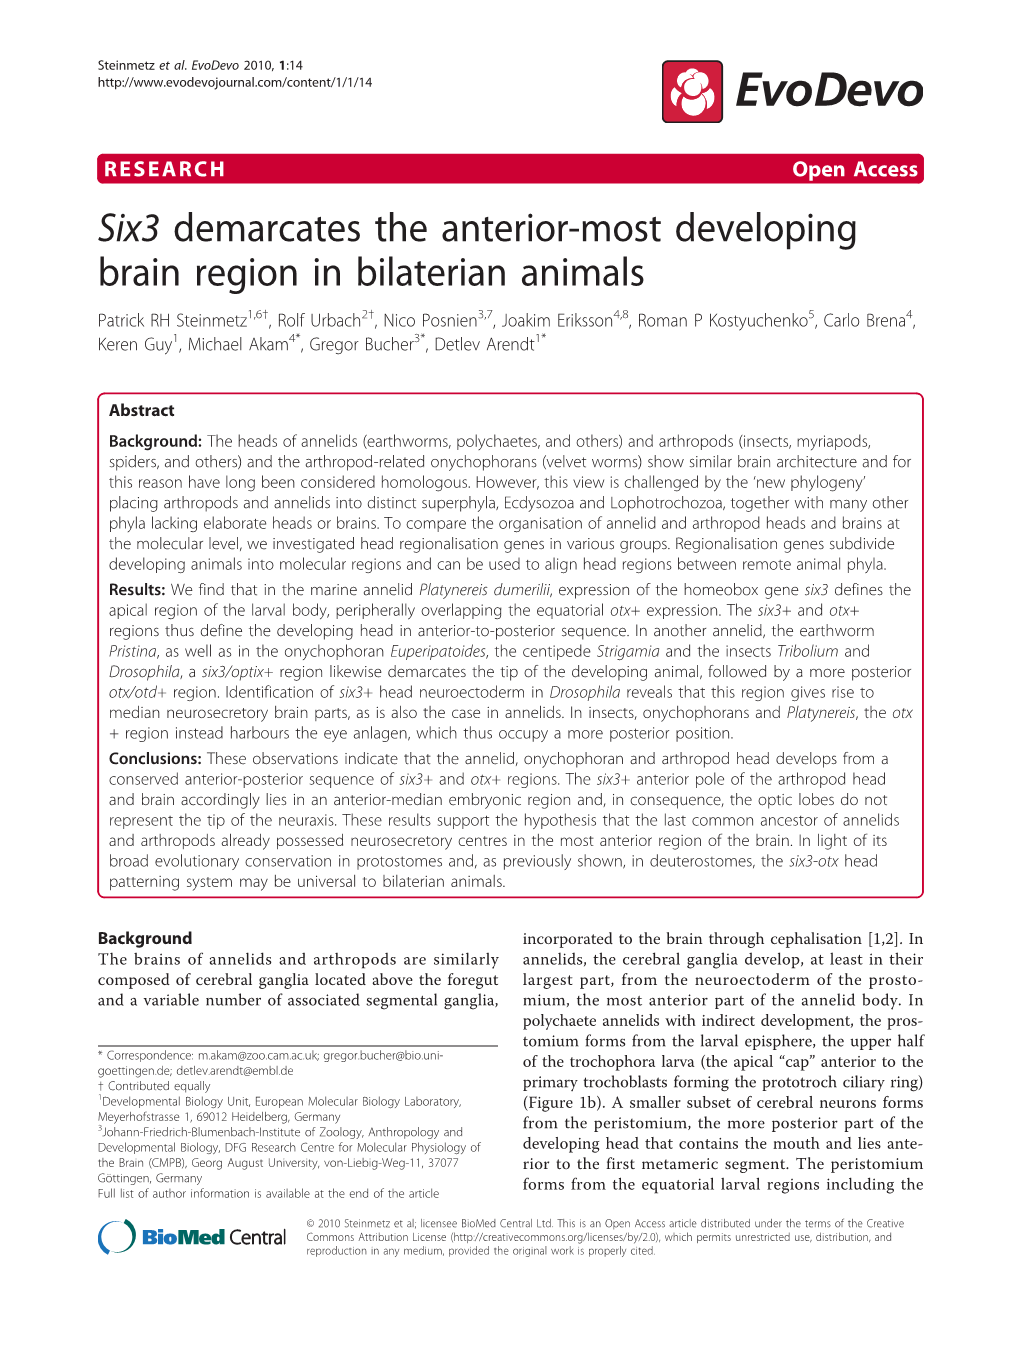 Six3 Demarcates the Anterior-Most Developing Brain Region In